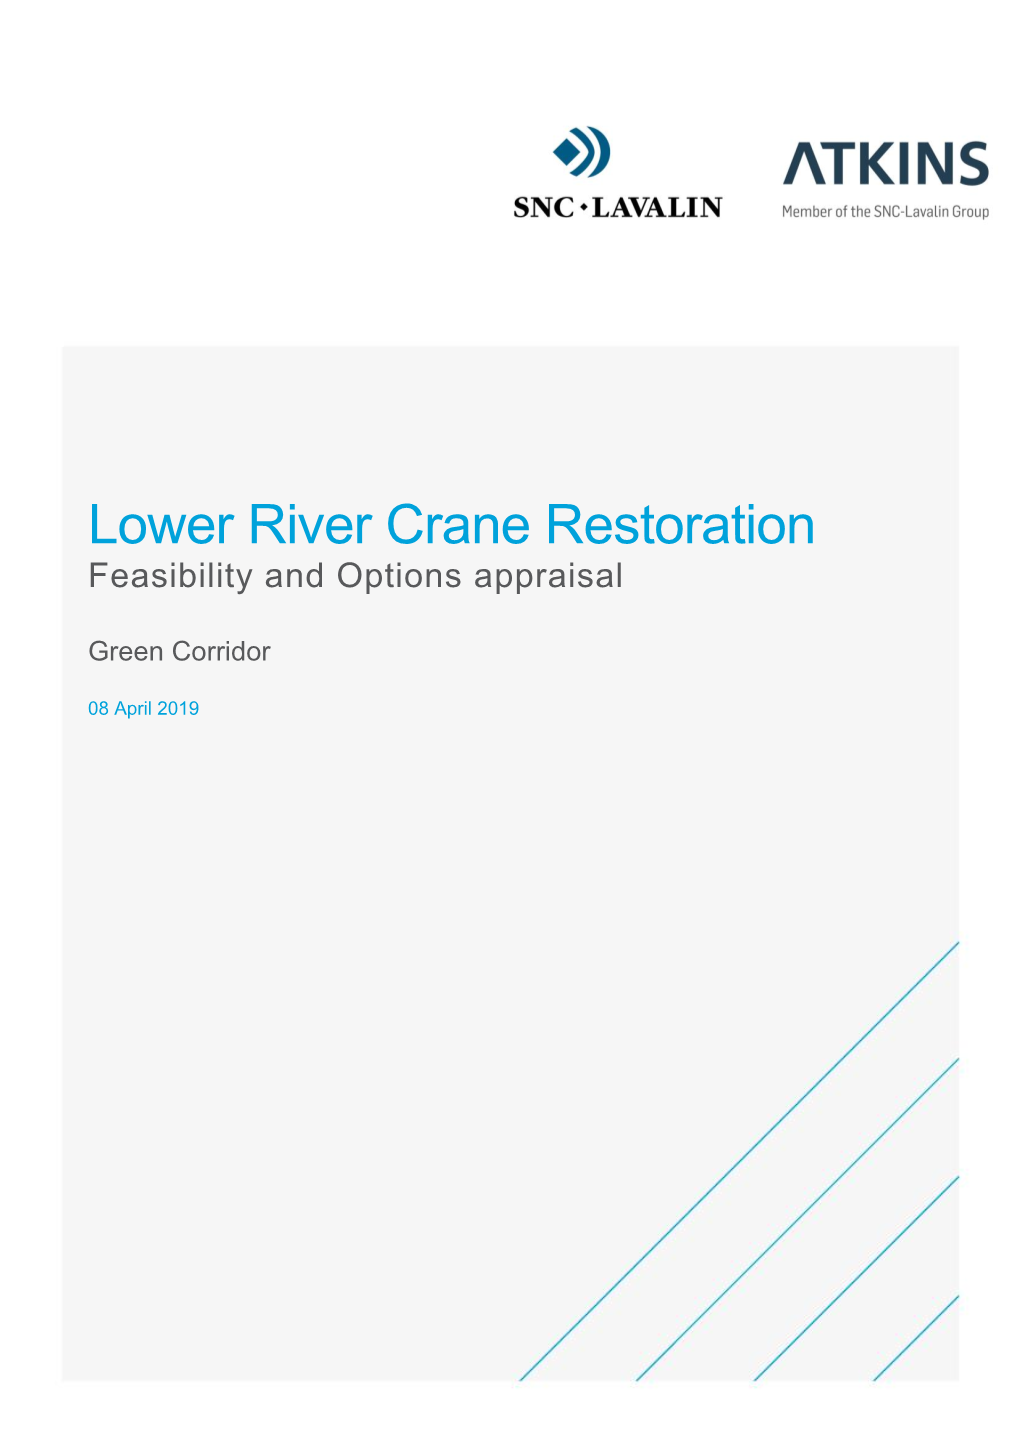 Lower River Crane Restoration Feasibility and Options Appraisal